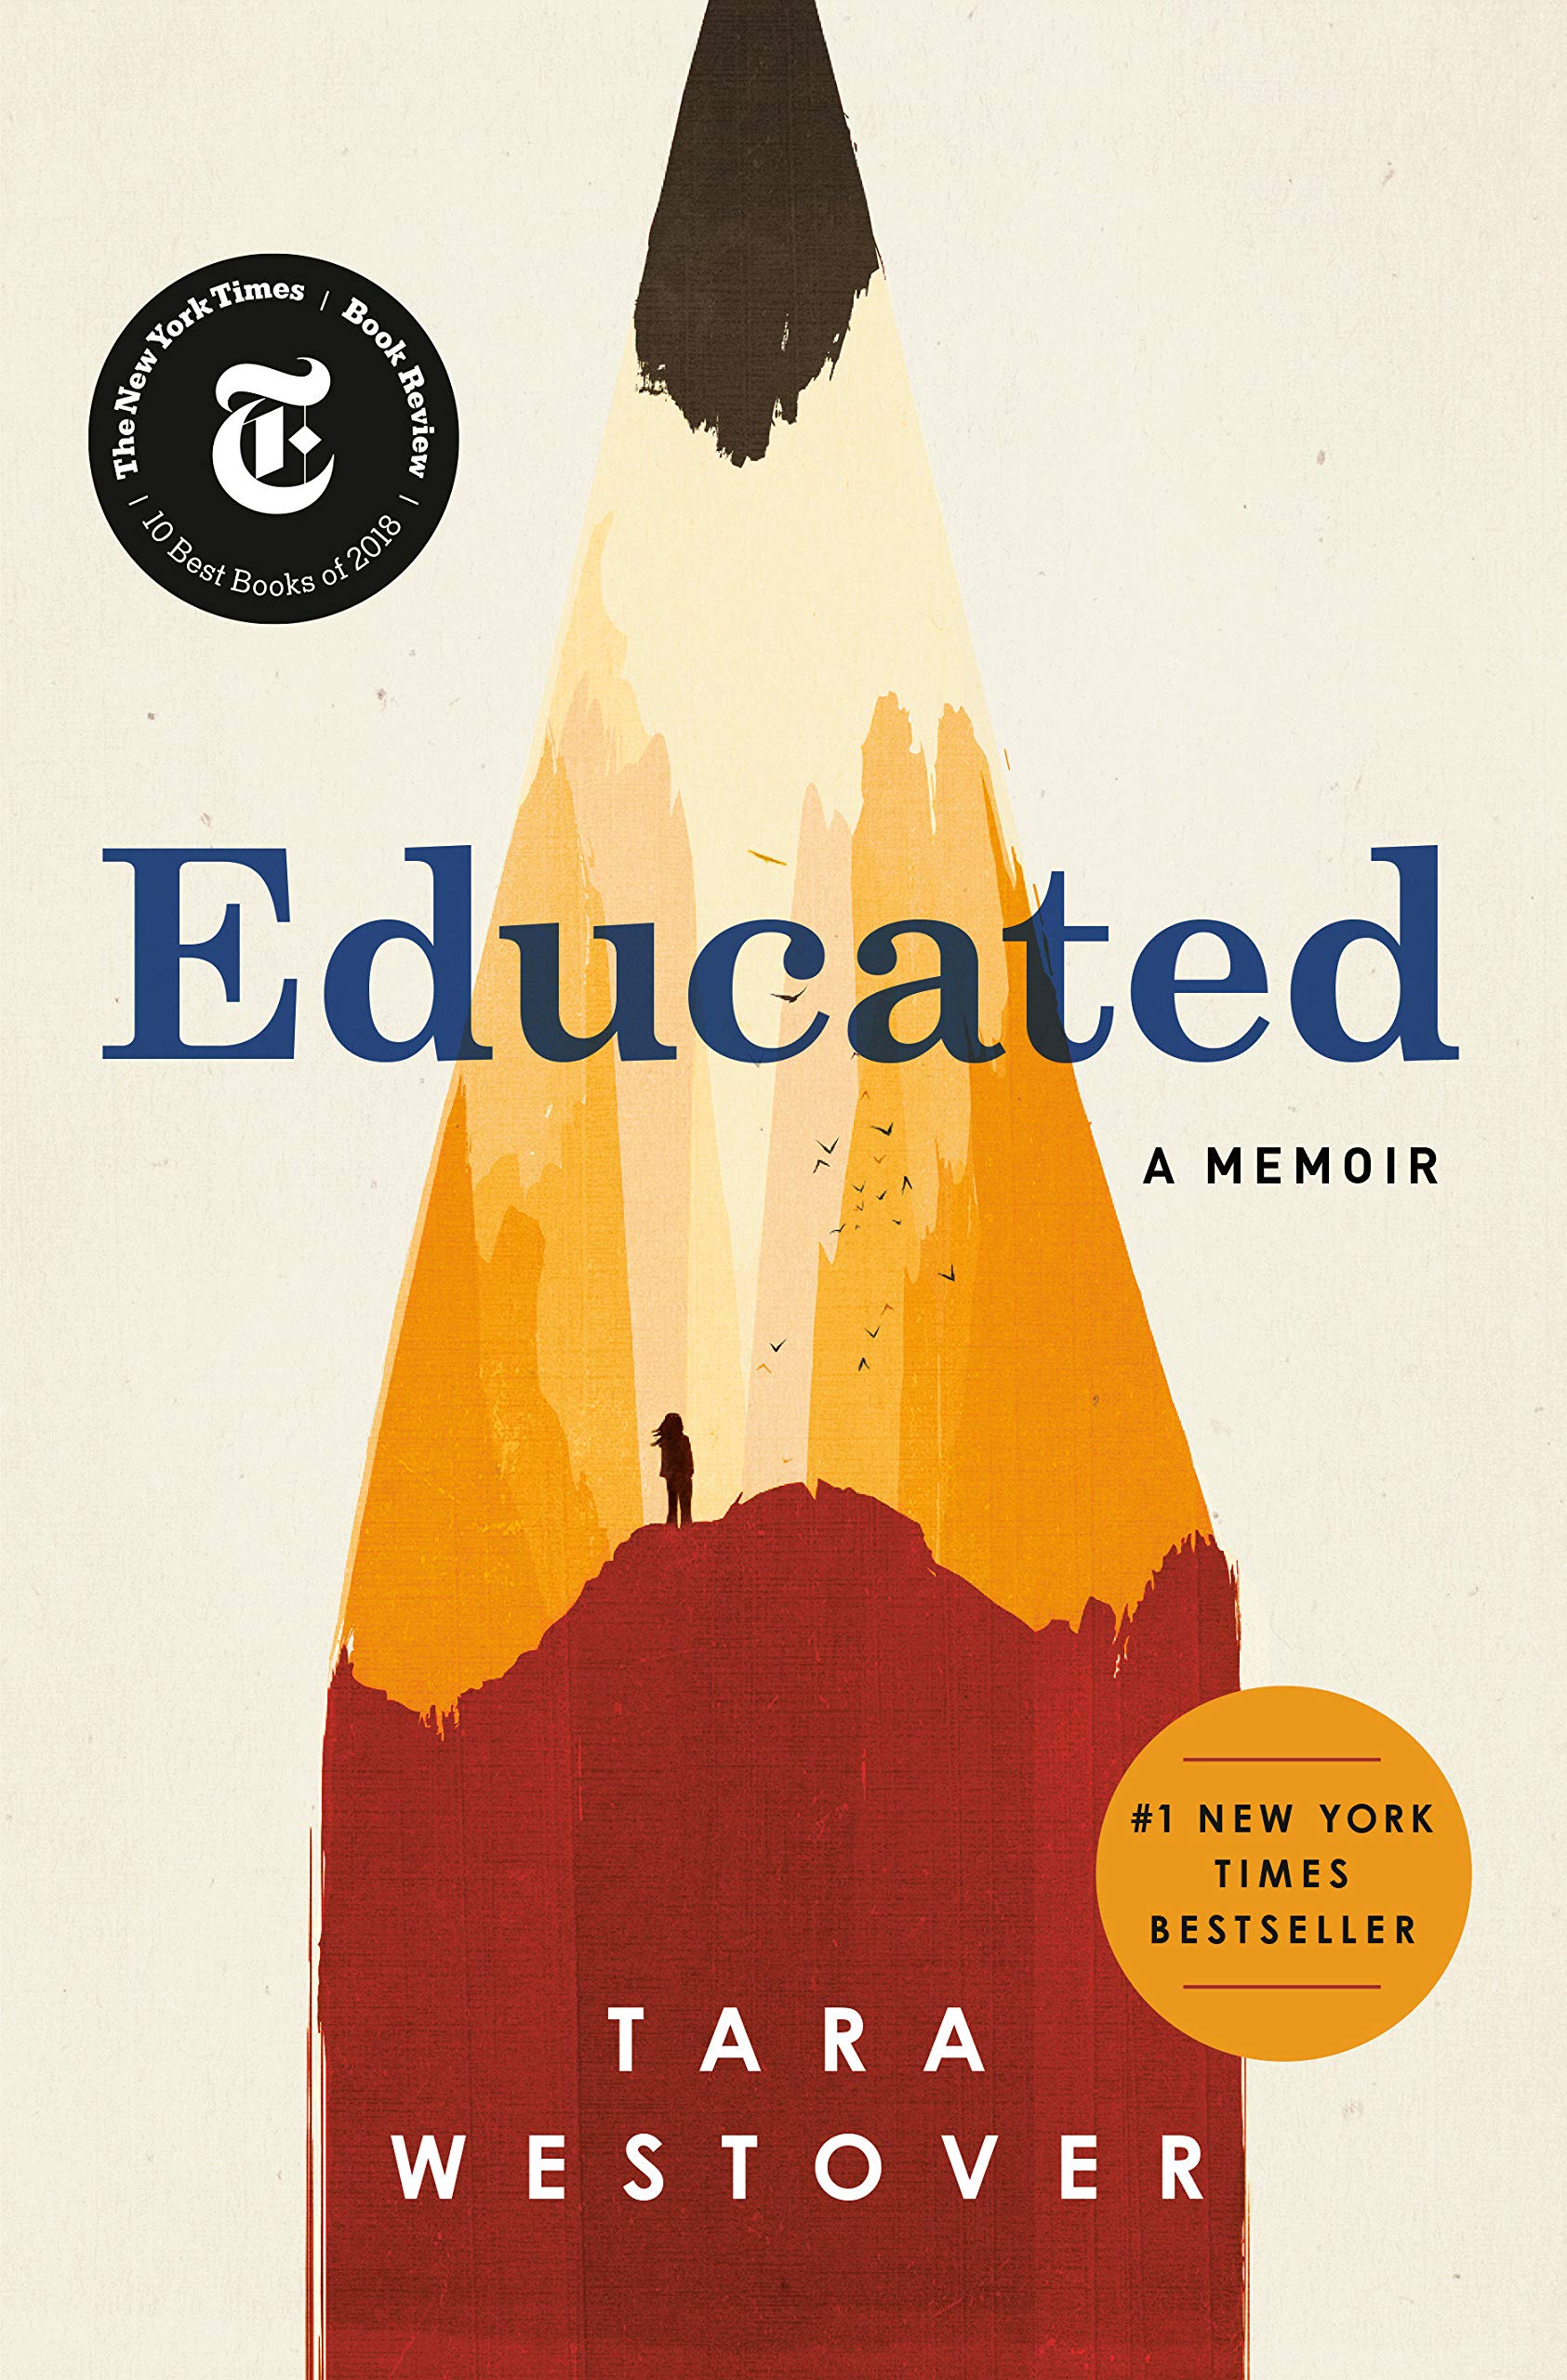 Book Cover: and enlarged image of the tip of a pencil with the title, "Educated" over it.